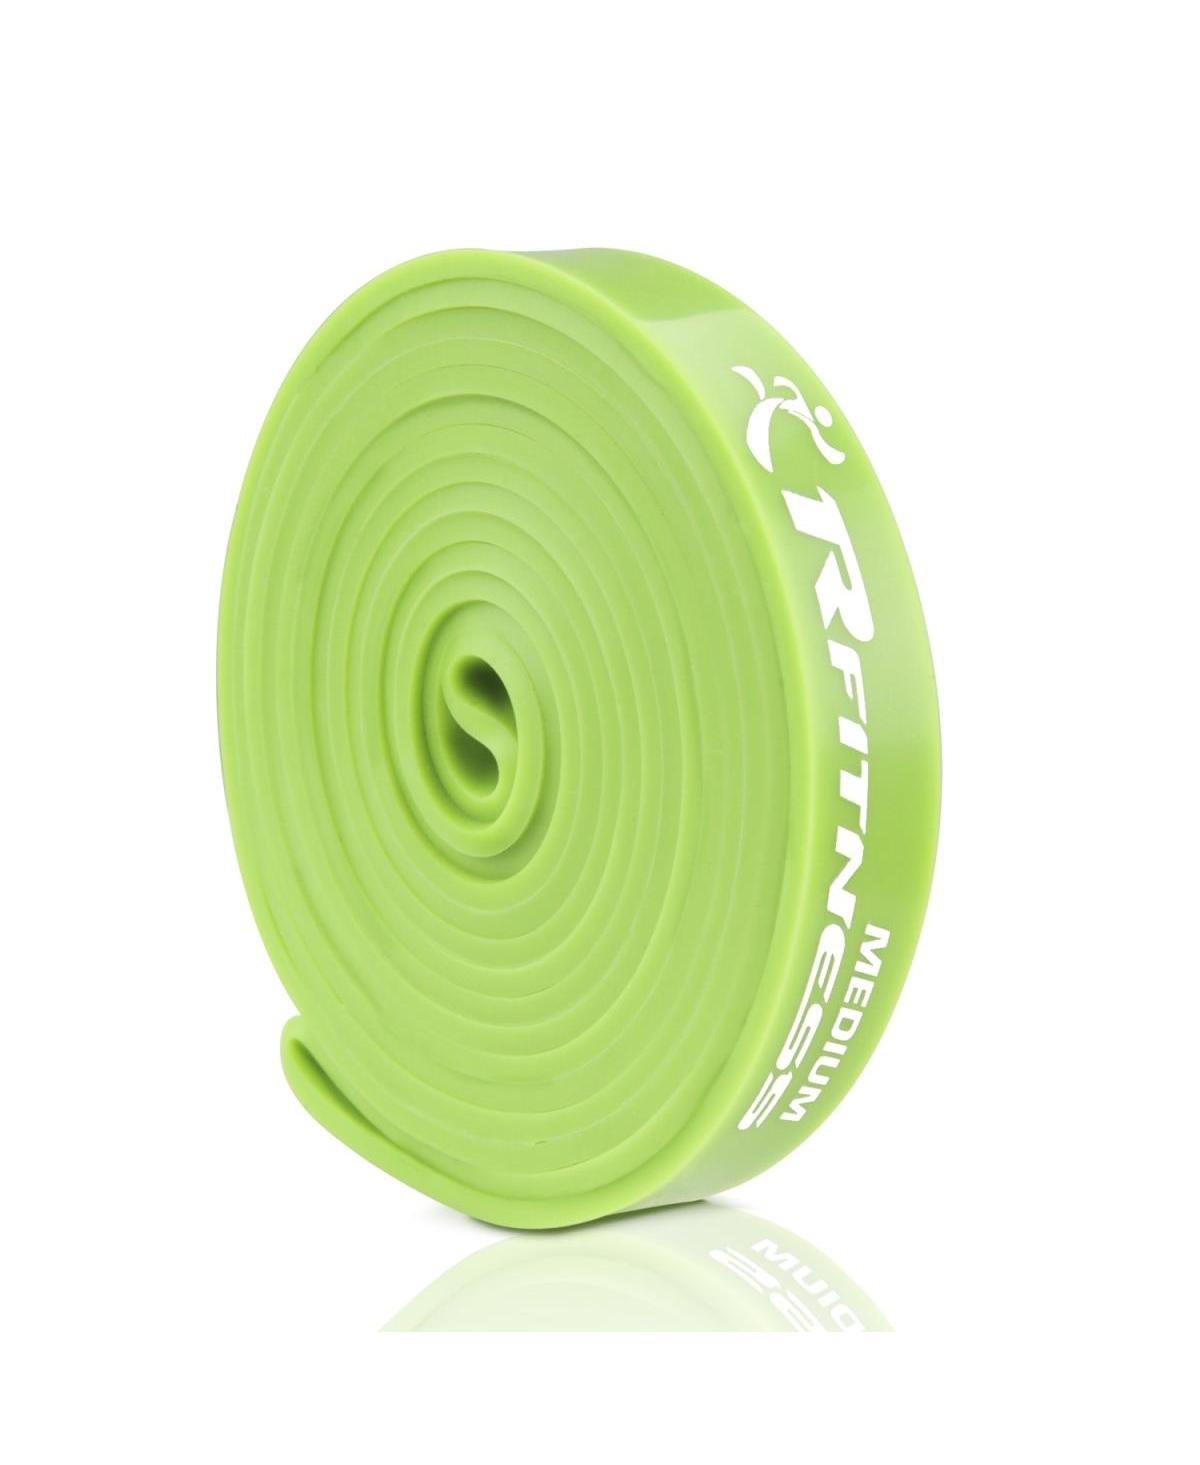 41 in. Rfitness Professional Long Loop Stretch Latex Exercise Band, Green - Medium - Green